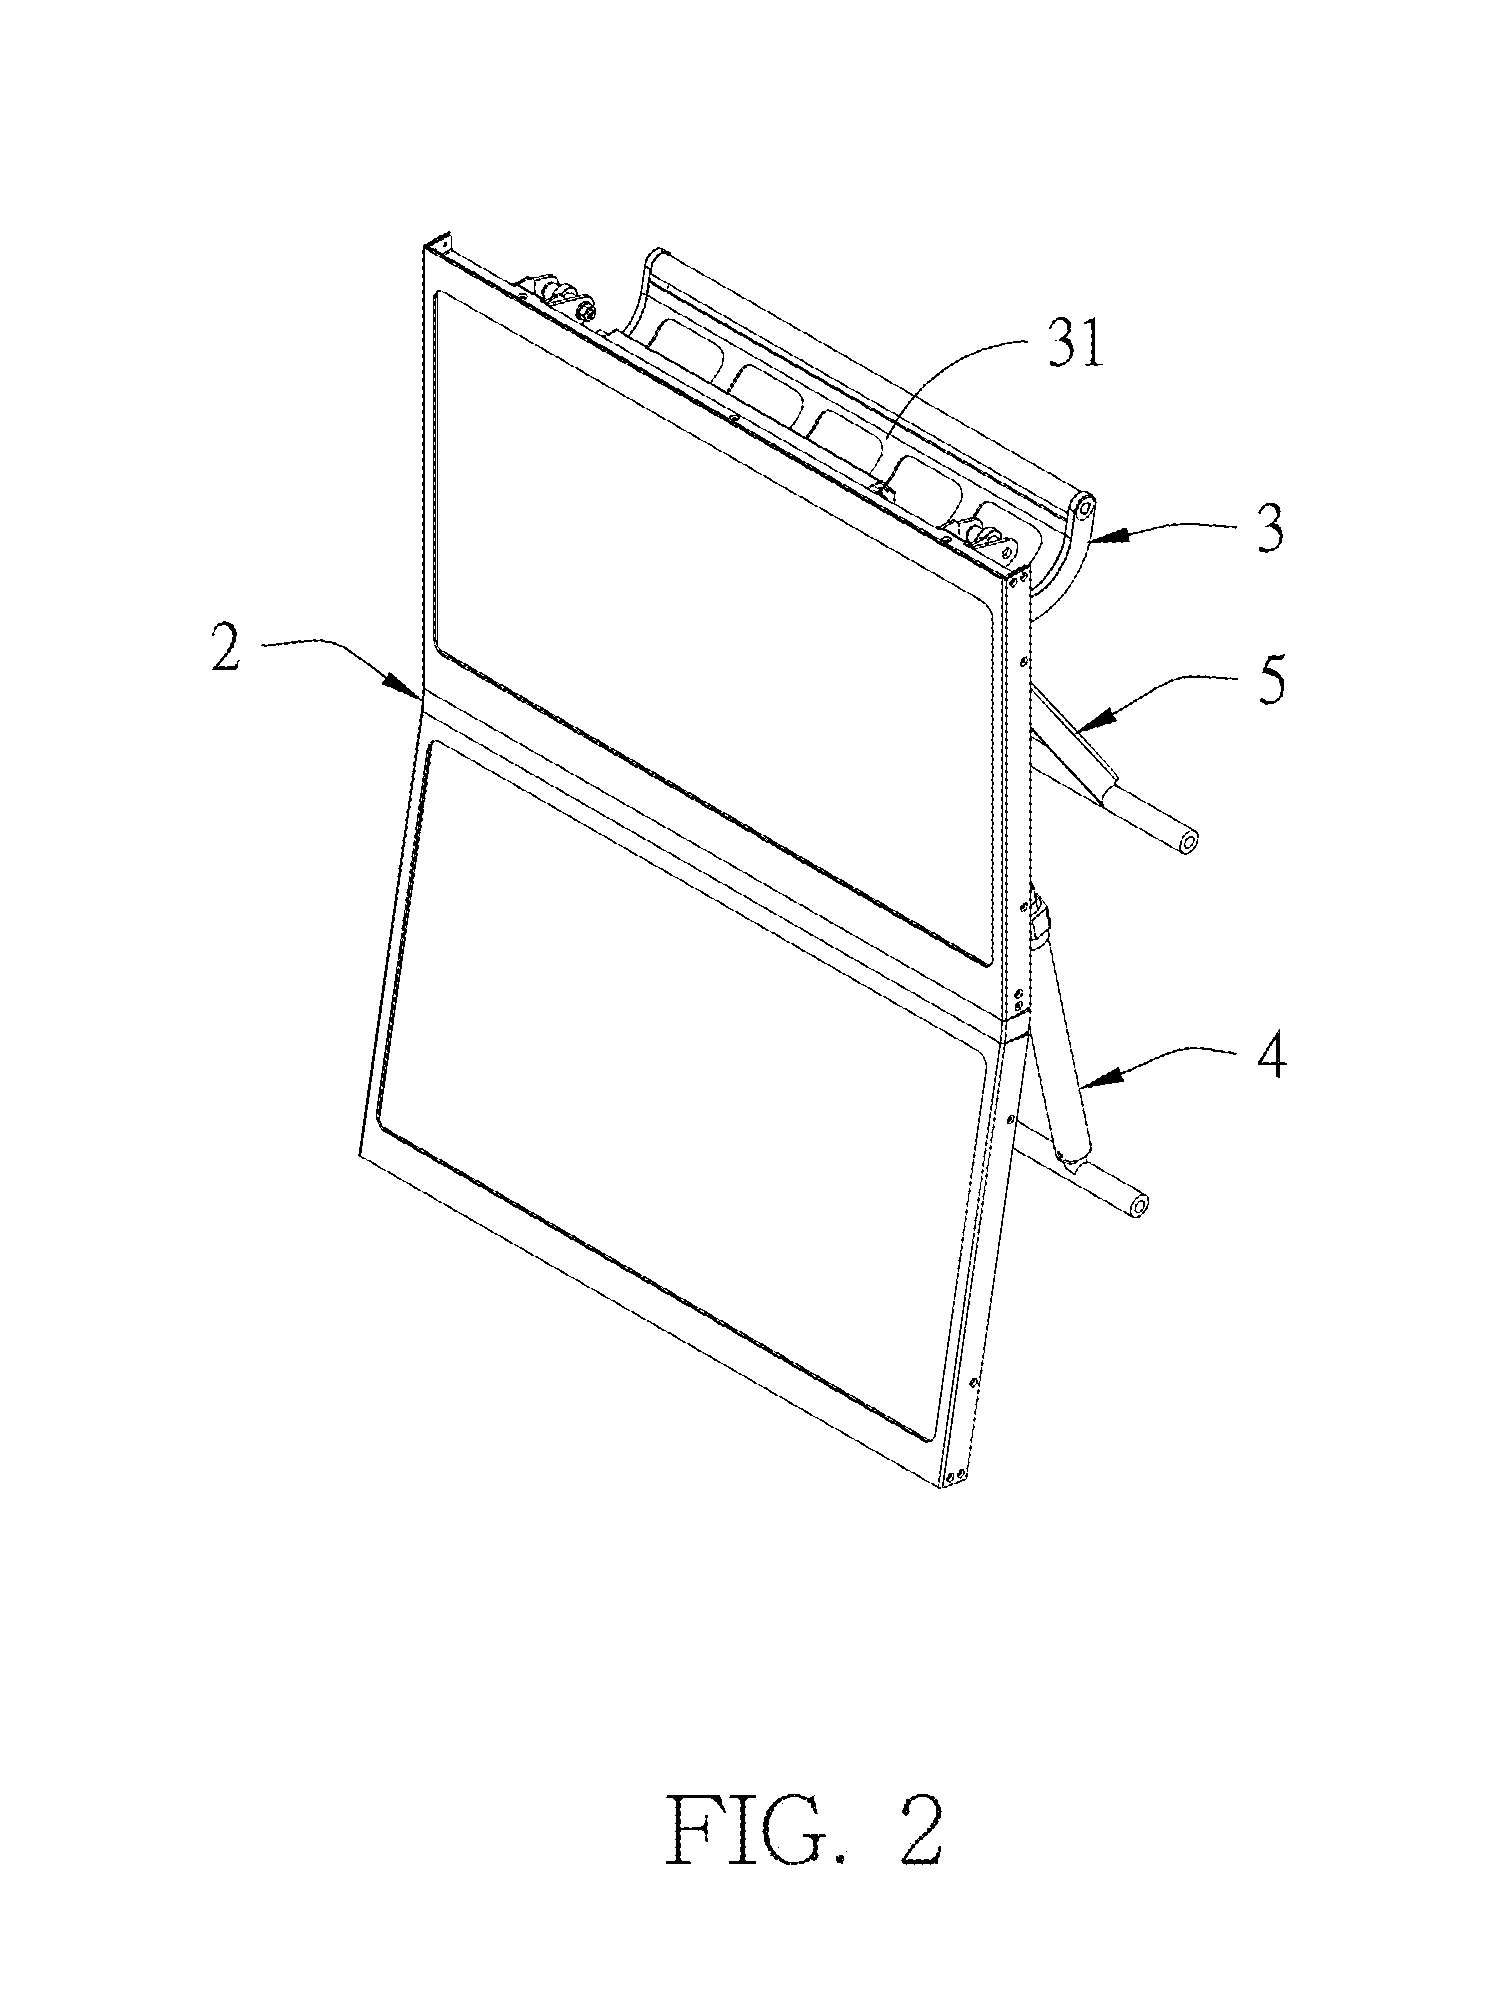 Hinge device for lifting a panel of a game machine